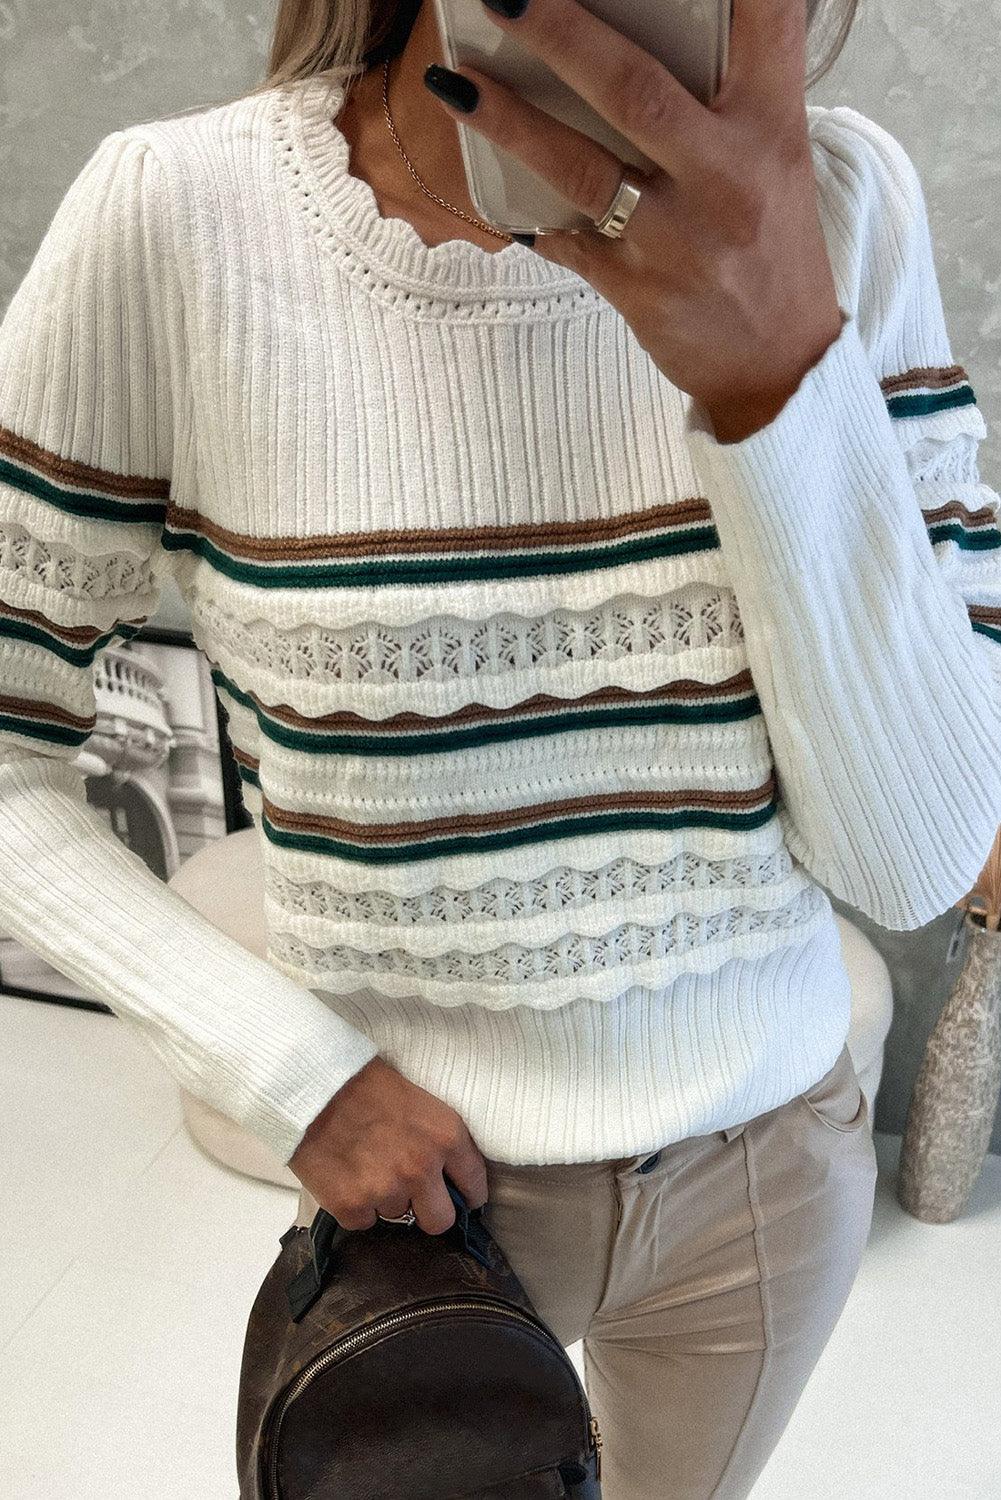 Striped Ribbed Scalloped Detail Knit Sweater - L & M Kee, LLC